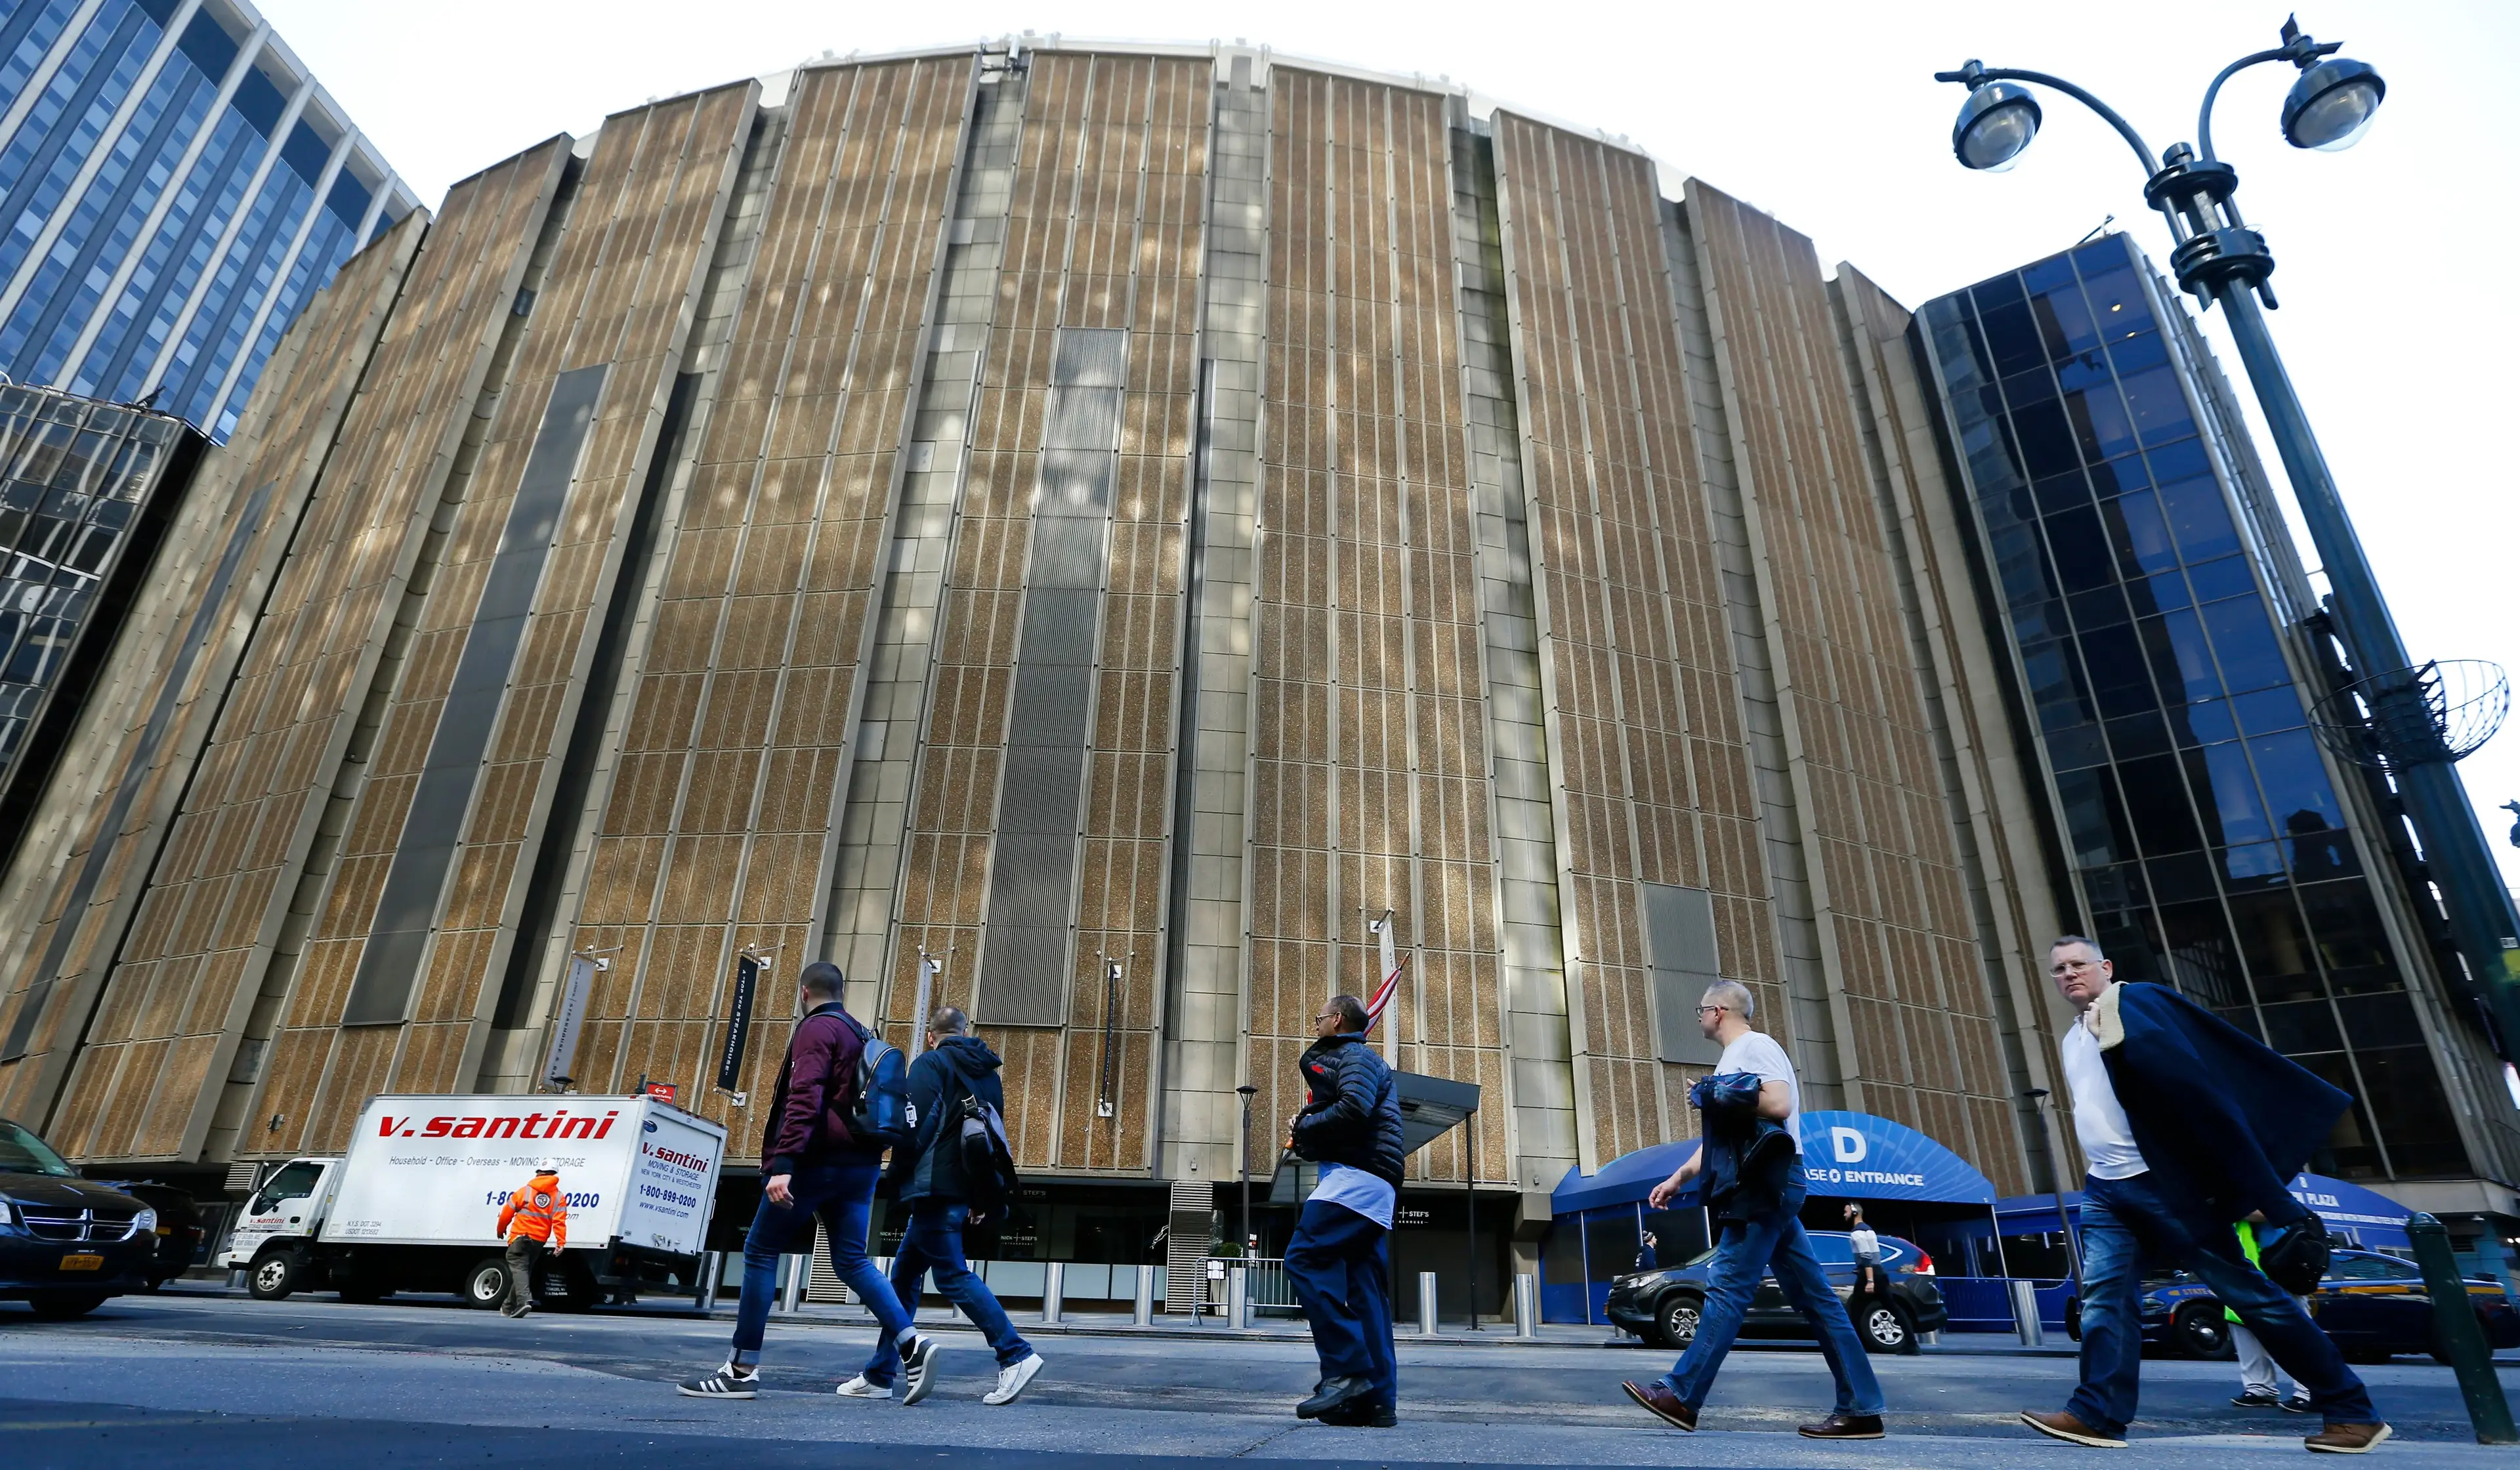 Mar 12, 2020; New York, New York, USA; The exterior of Madison Square Garden is seen as pedestrians walk by. The Big East mens basketball tournament has been cancelled along with the NCAA Division I mens and womens 2020 basketball tournaments as well as all remaining winter and spring NCAA championships due to concerns over the Covid 19 coronavirus. Mandatory Credit: Noah K. Murray-USA TODAY Sports / Noah K. Murray-USA TODAY Sports